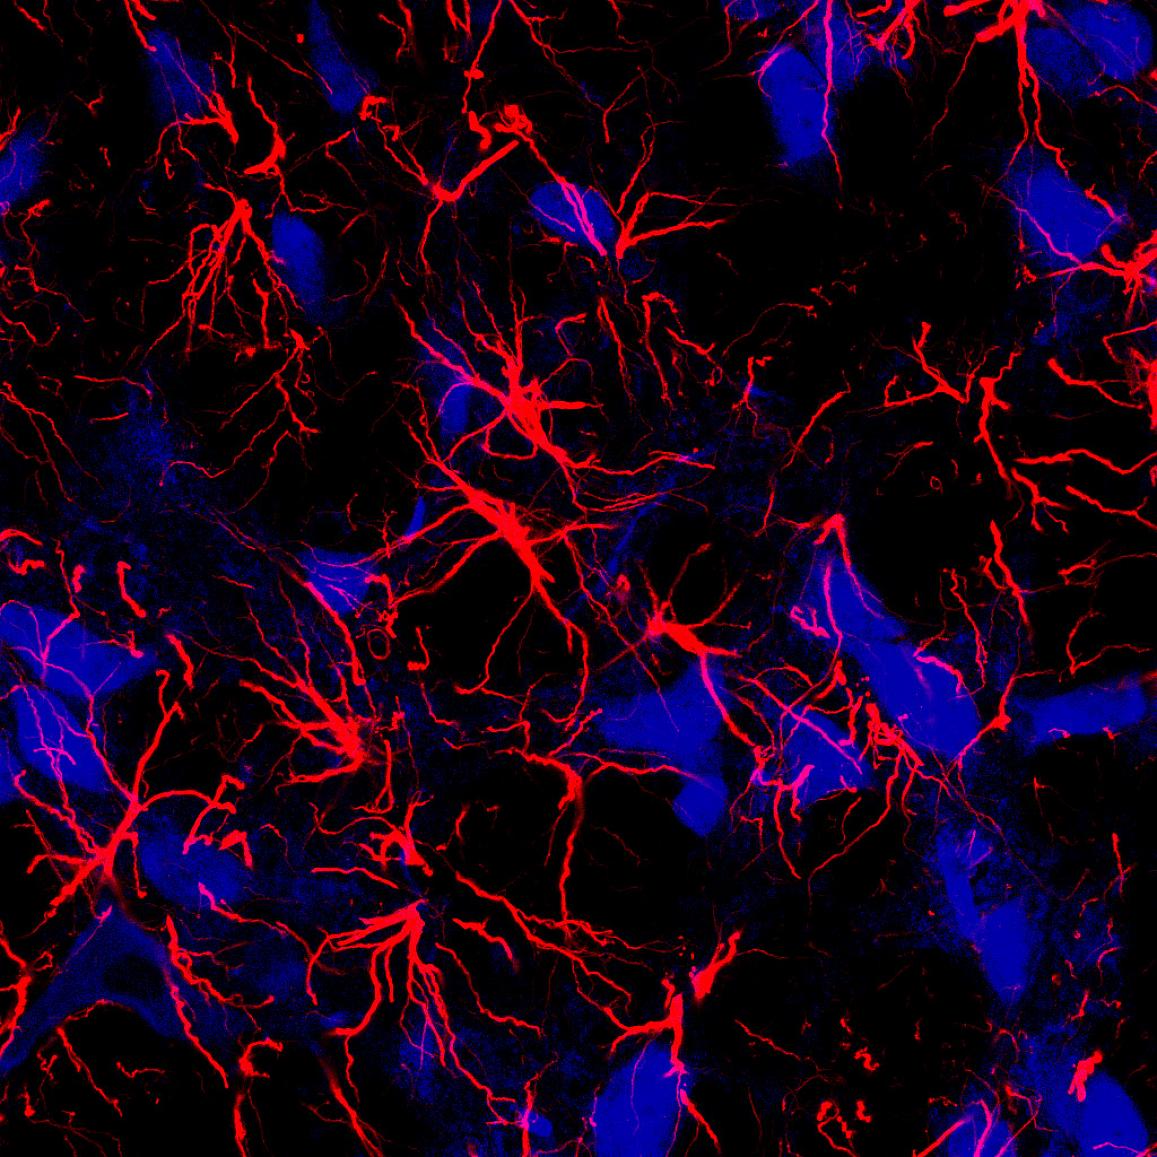 star-shaped brain cells called astrocytes